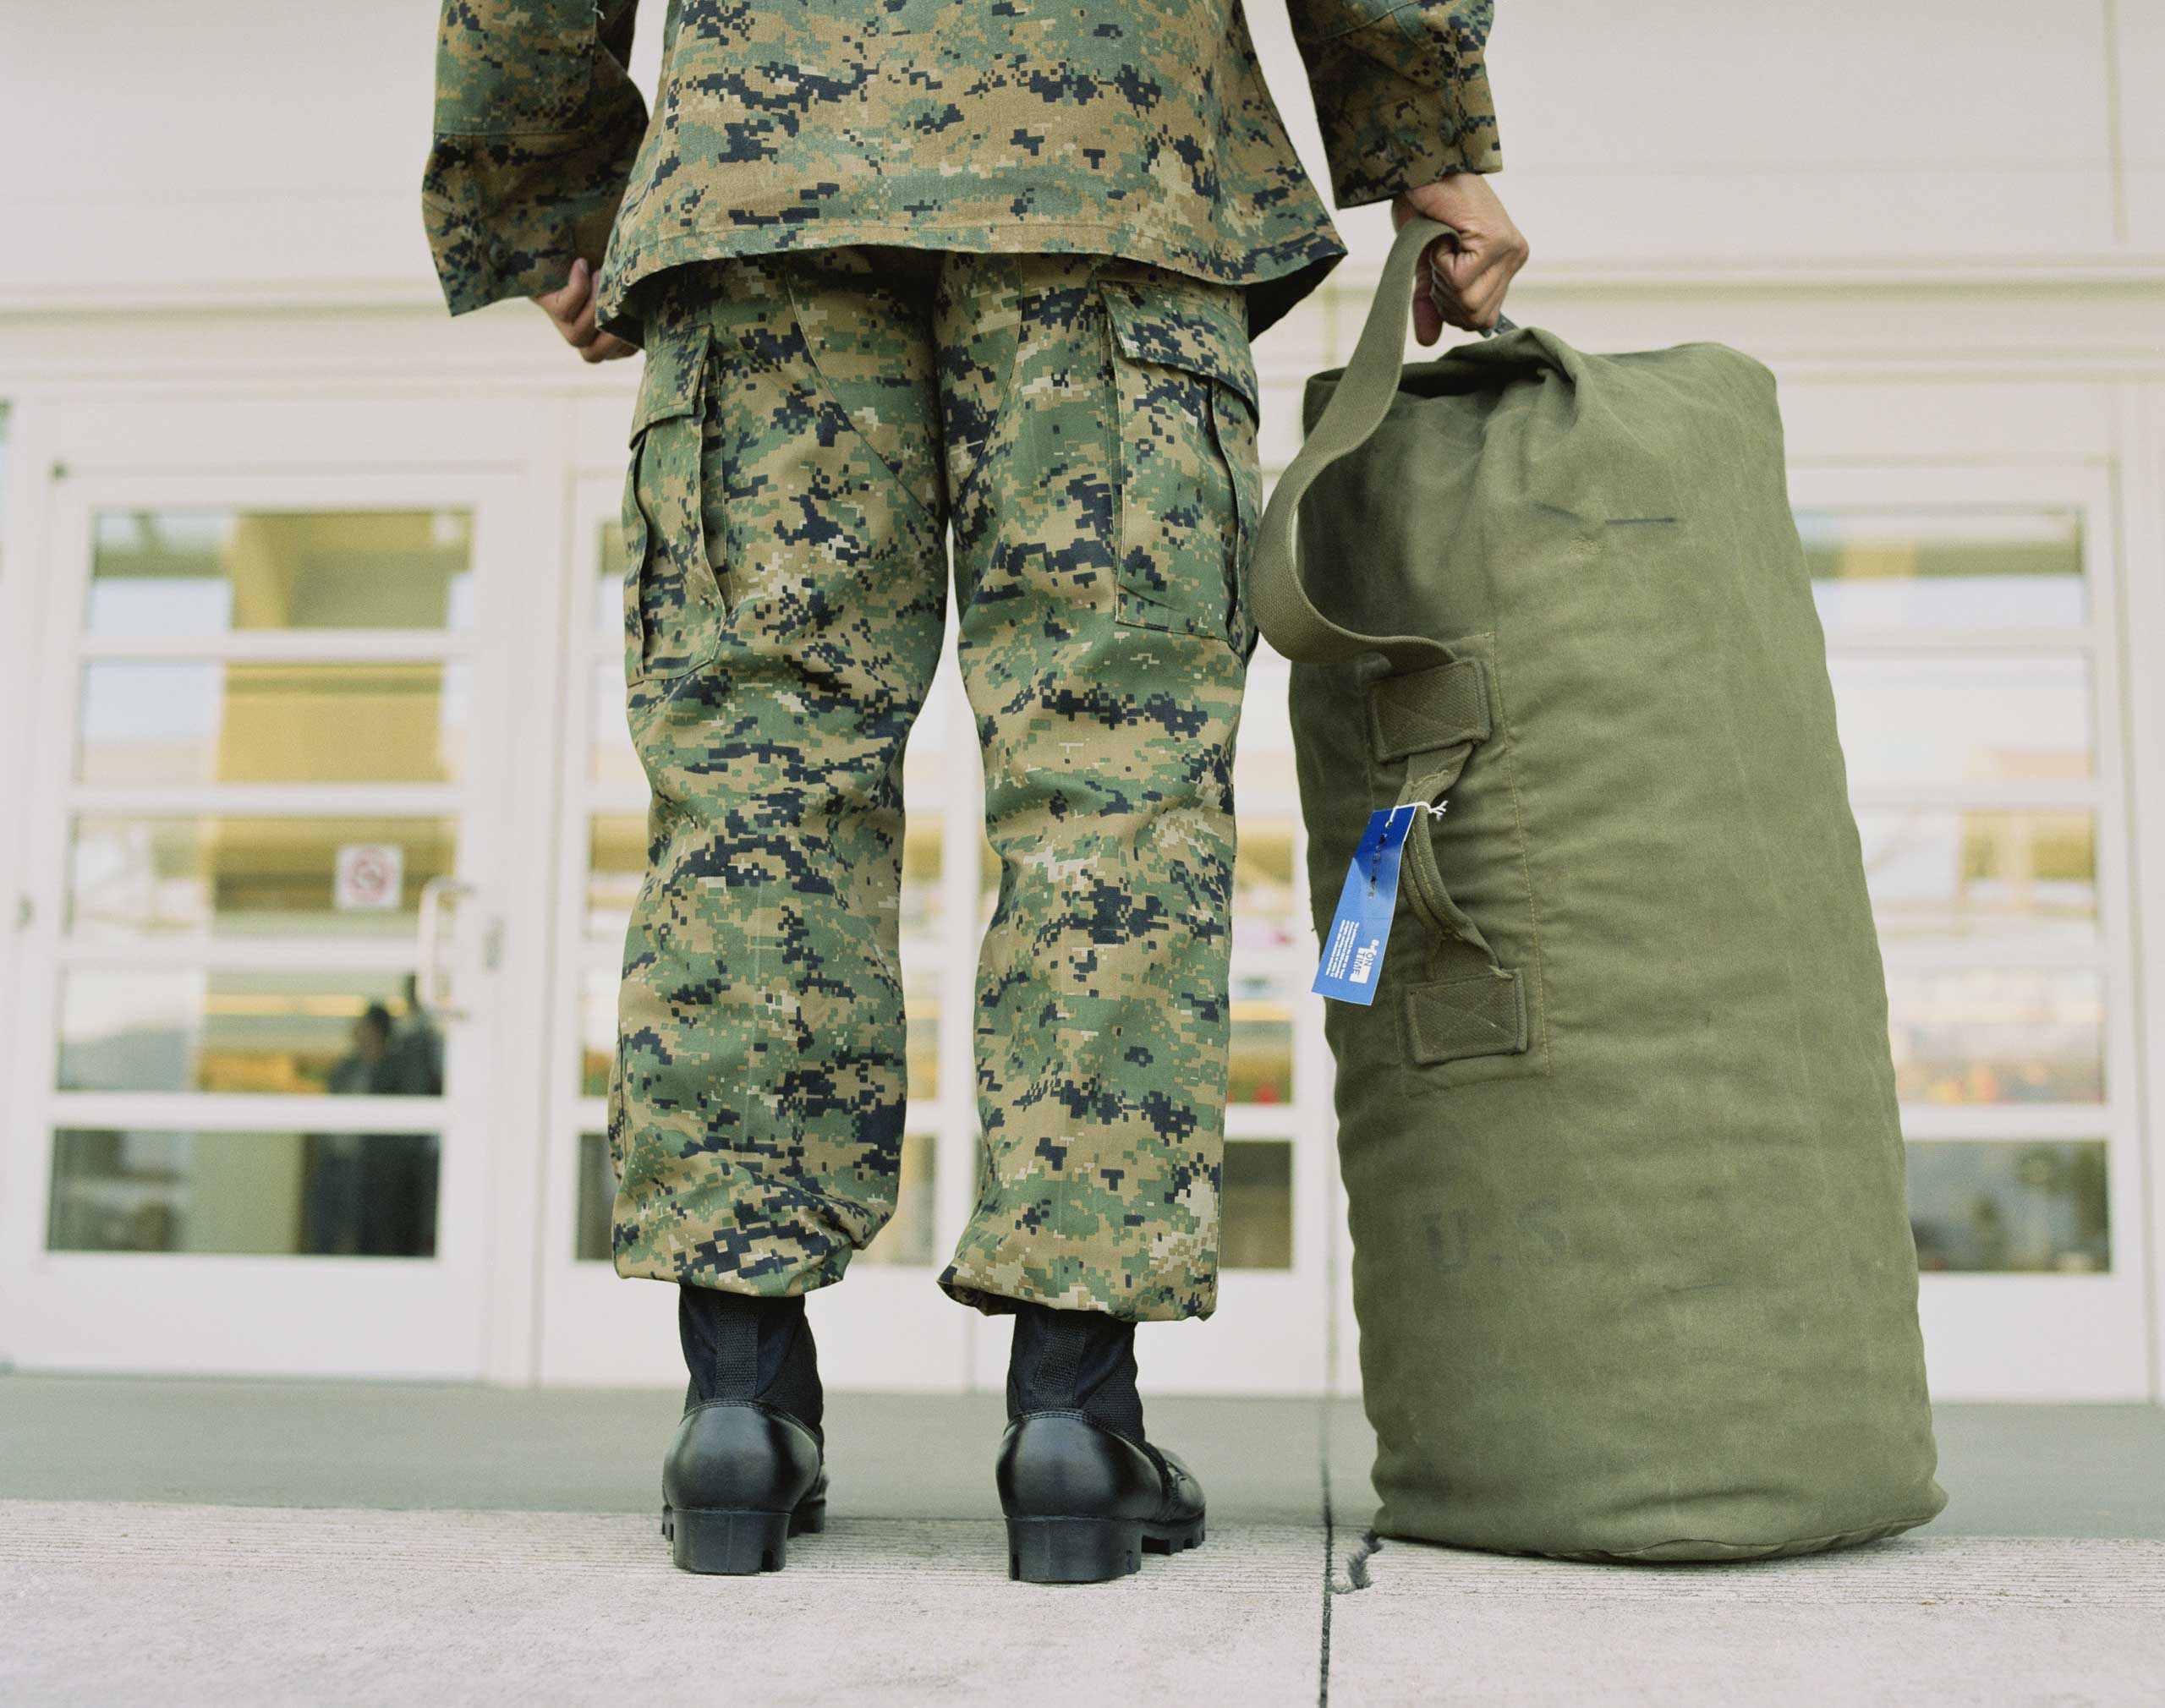 Military soldier with bag in airport, low section